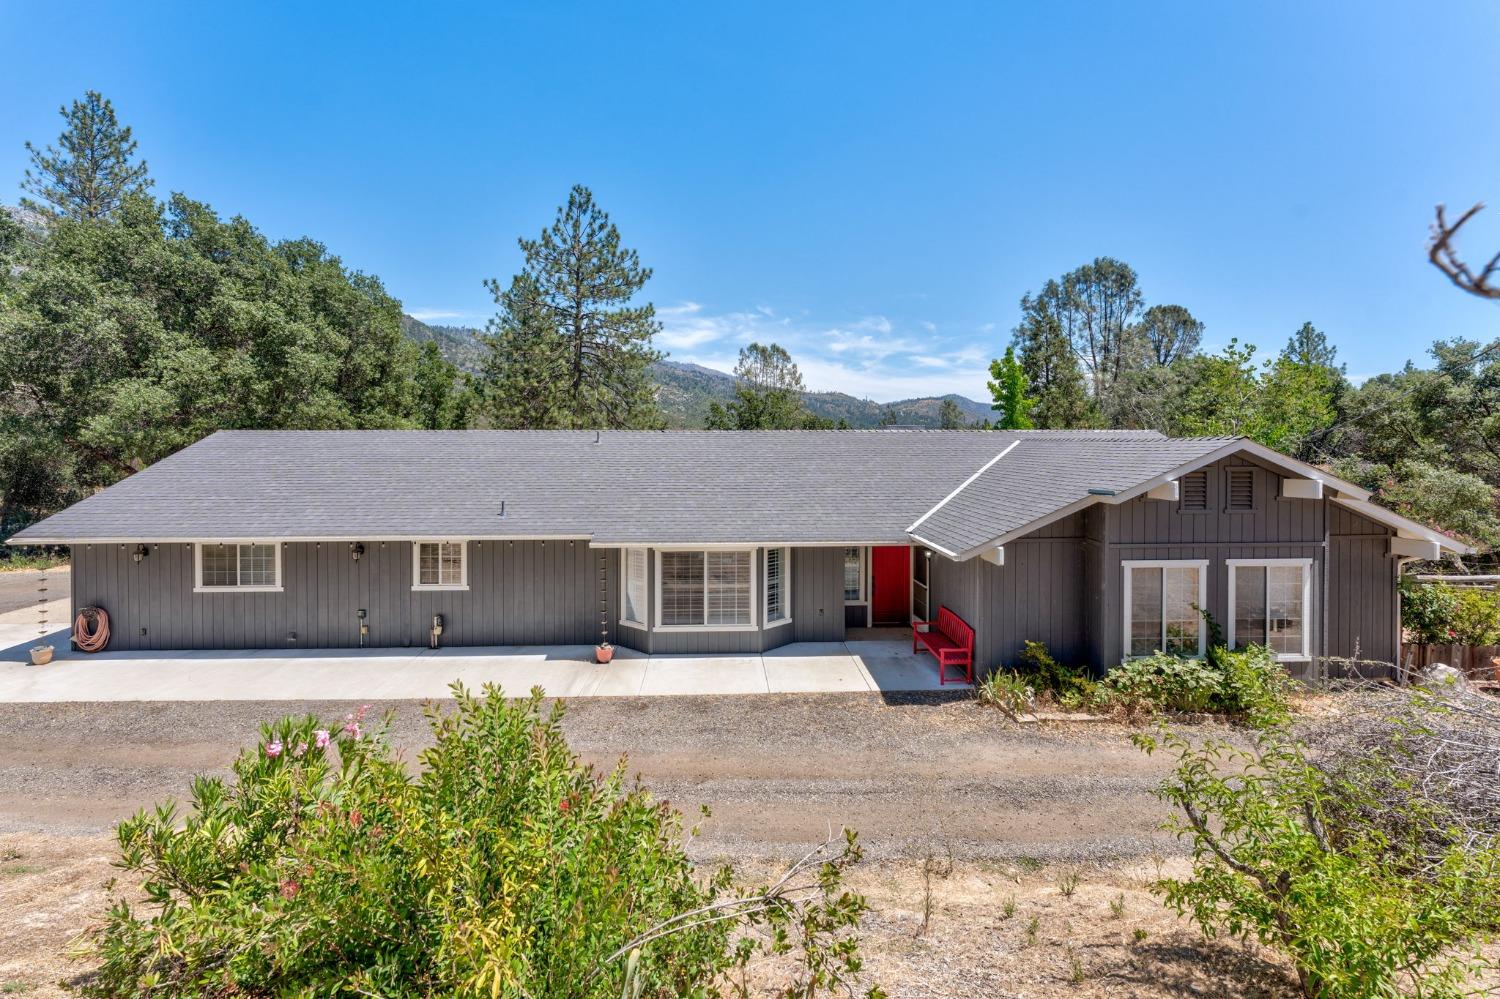 Photo of 57270 Thunder Wy in North Fork, CA